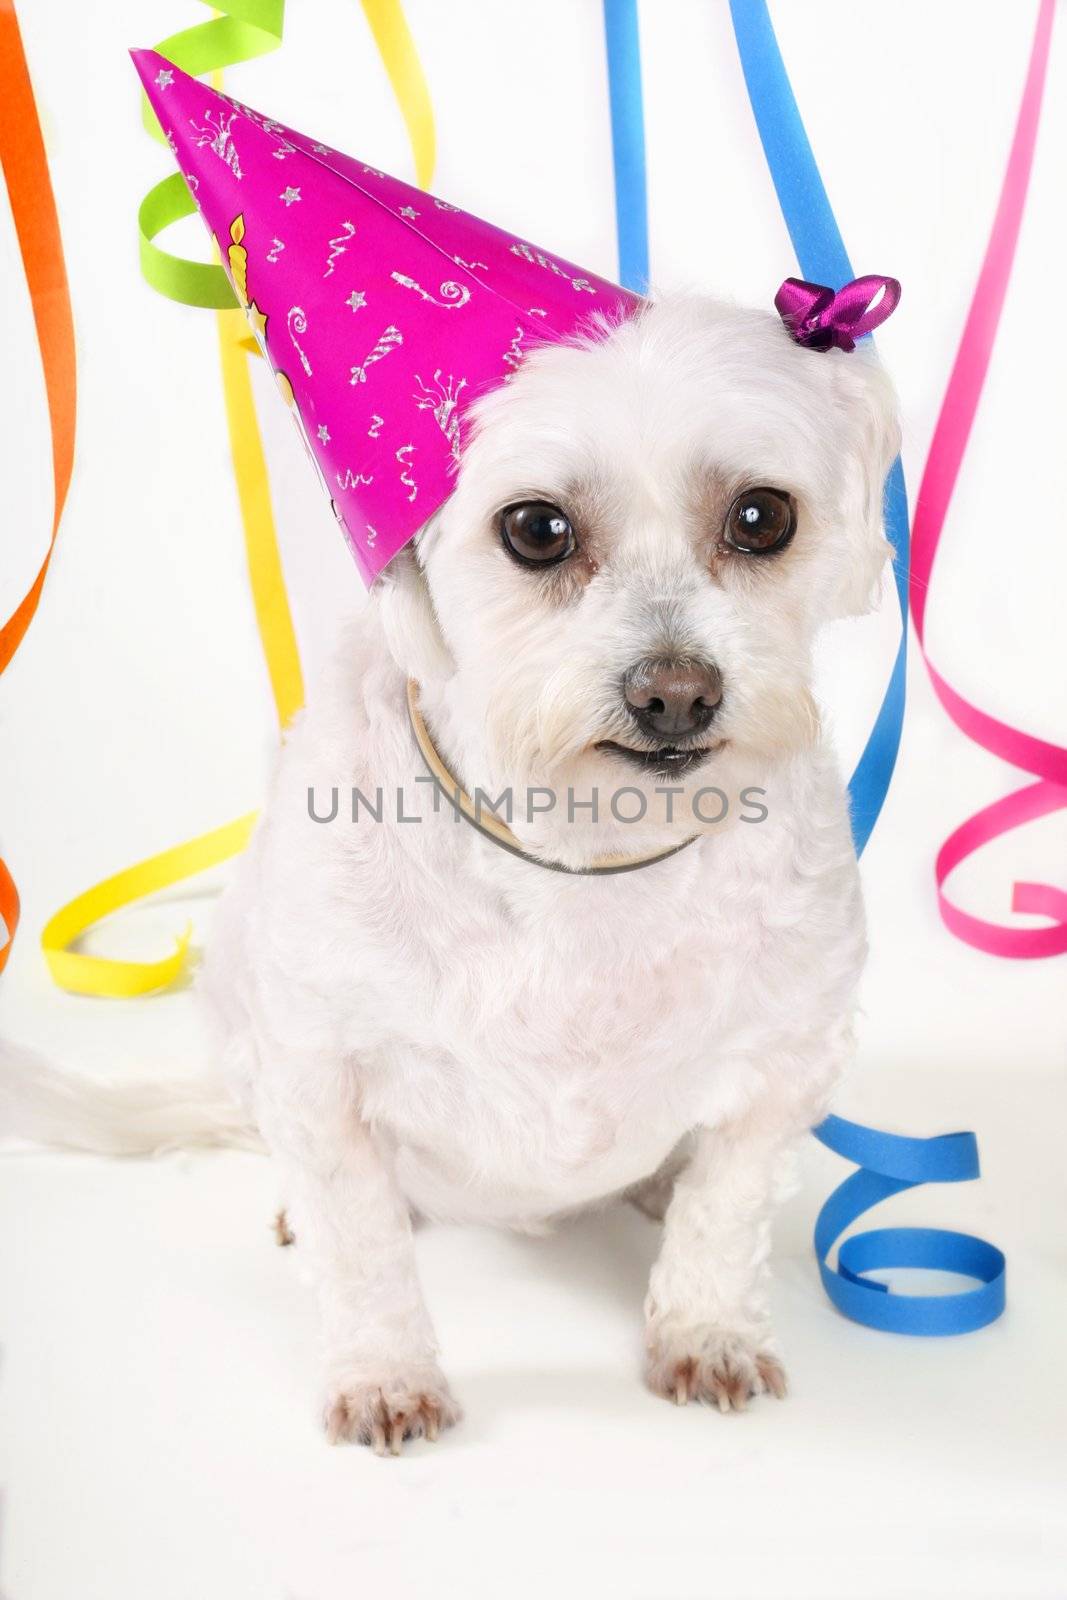 White dog, party hat and streamers